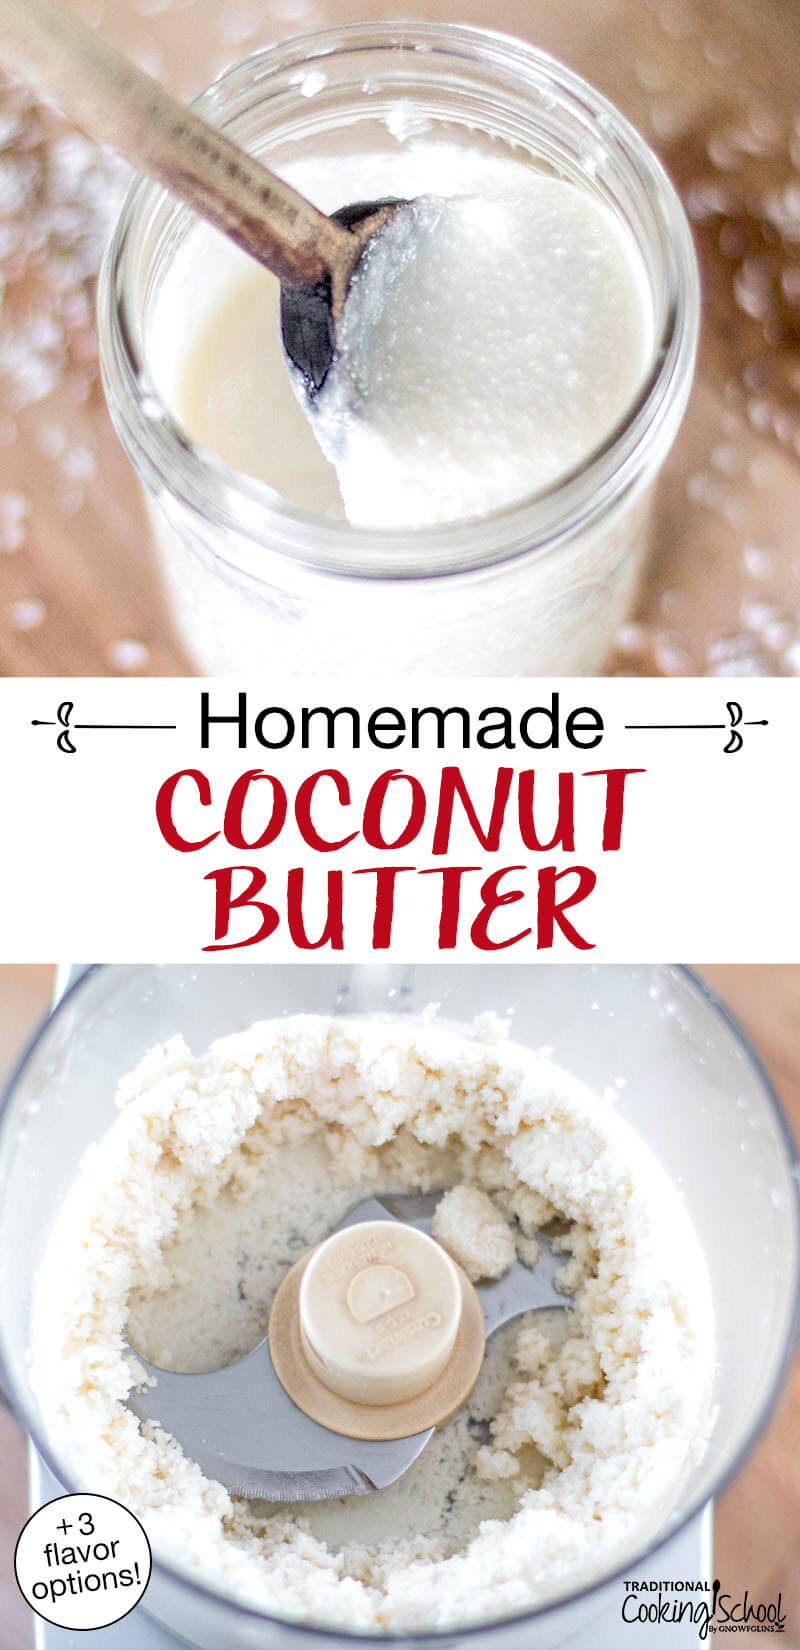 Photo collage of blending shredded coconut in a food processor until it turns into creamy coconut butter. Text overlay says: "Homemade Coconut Butter (+3 flavor options!)"